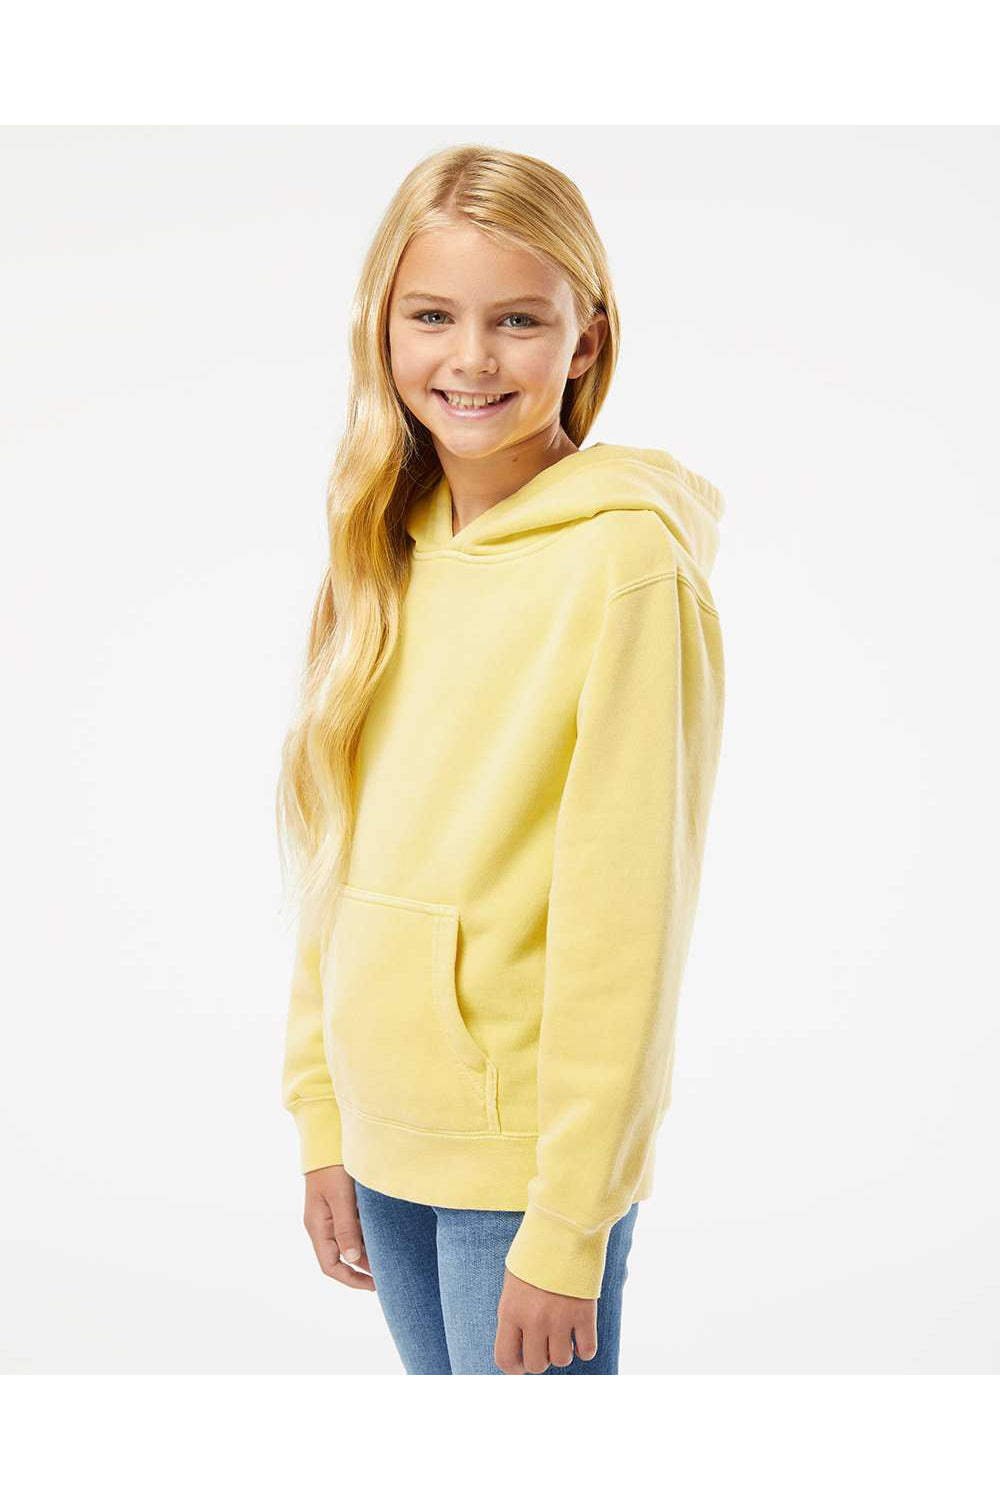 Independent Trading Co. PRM1500Y Youth Pigment Dyed Hooded Sweatshirt Hoodie Yellow Model Side